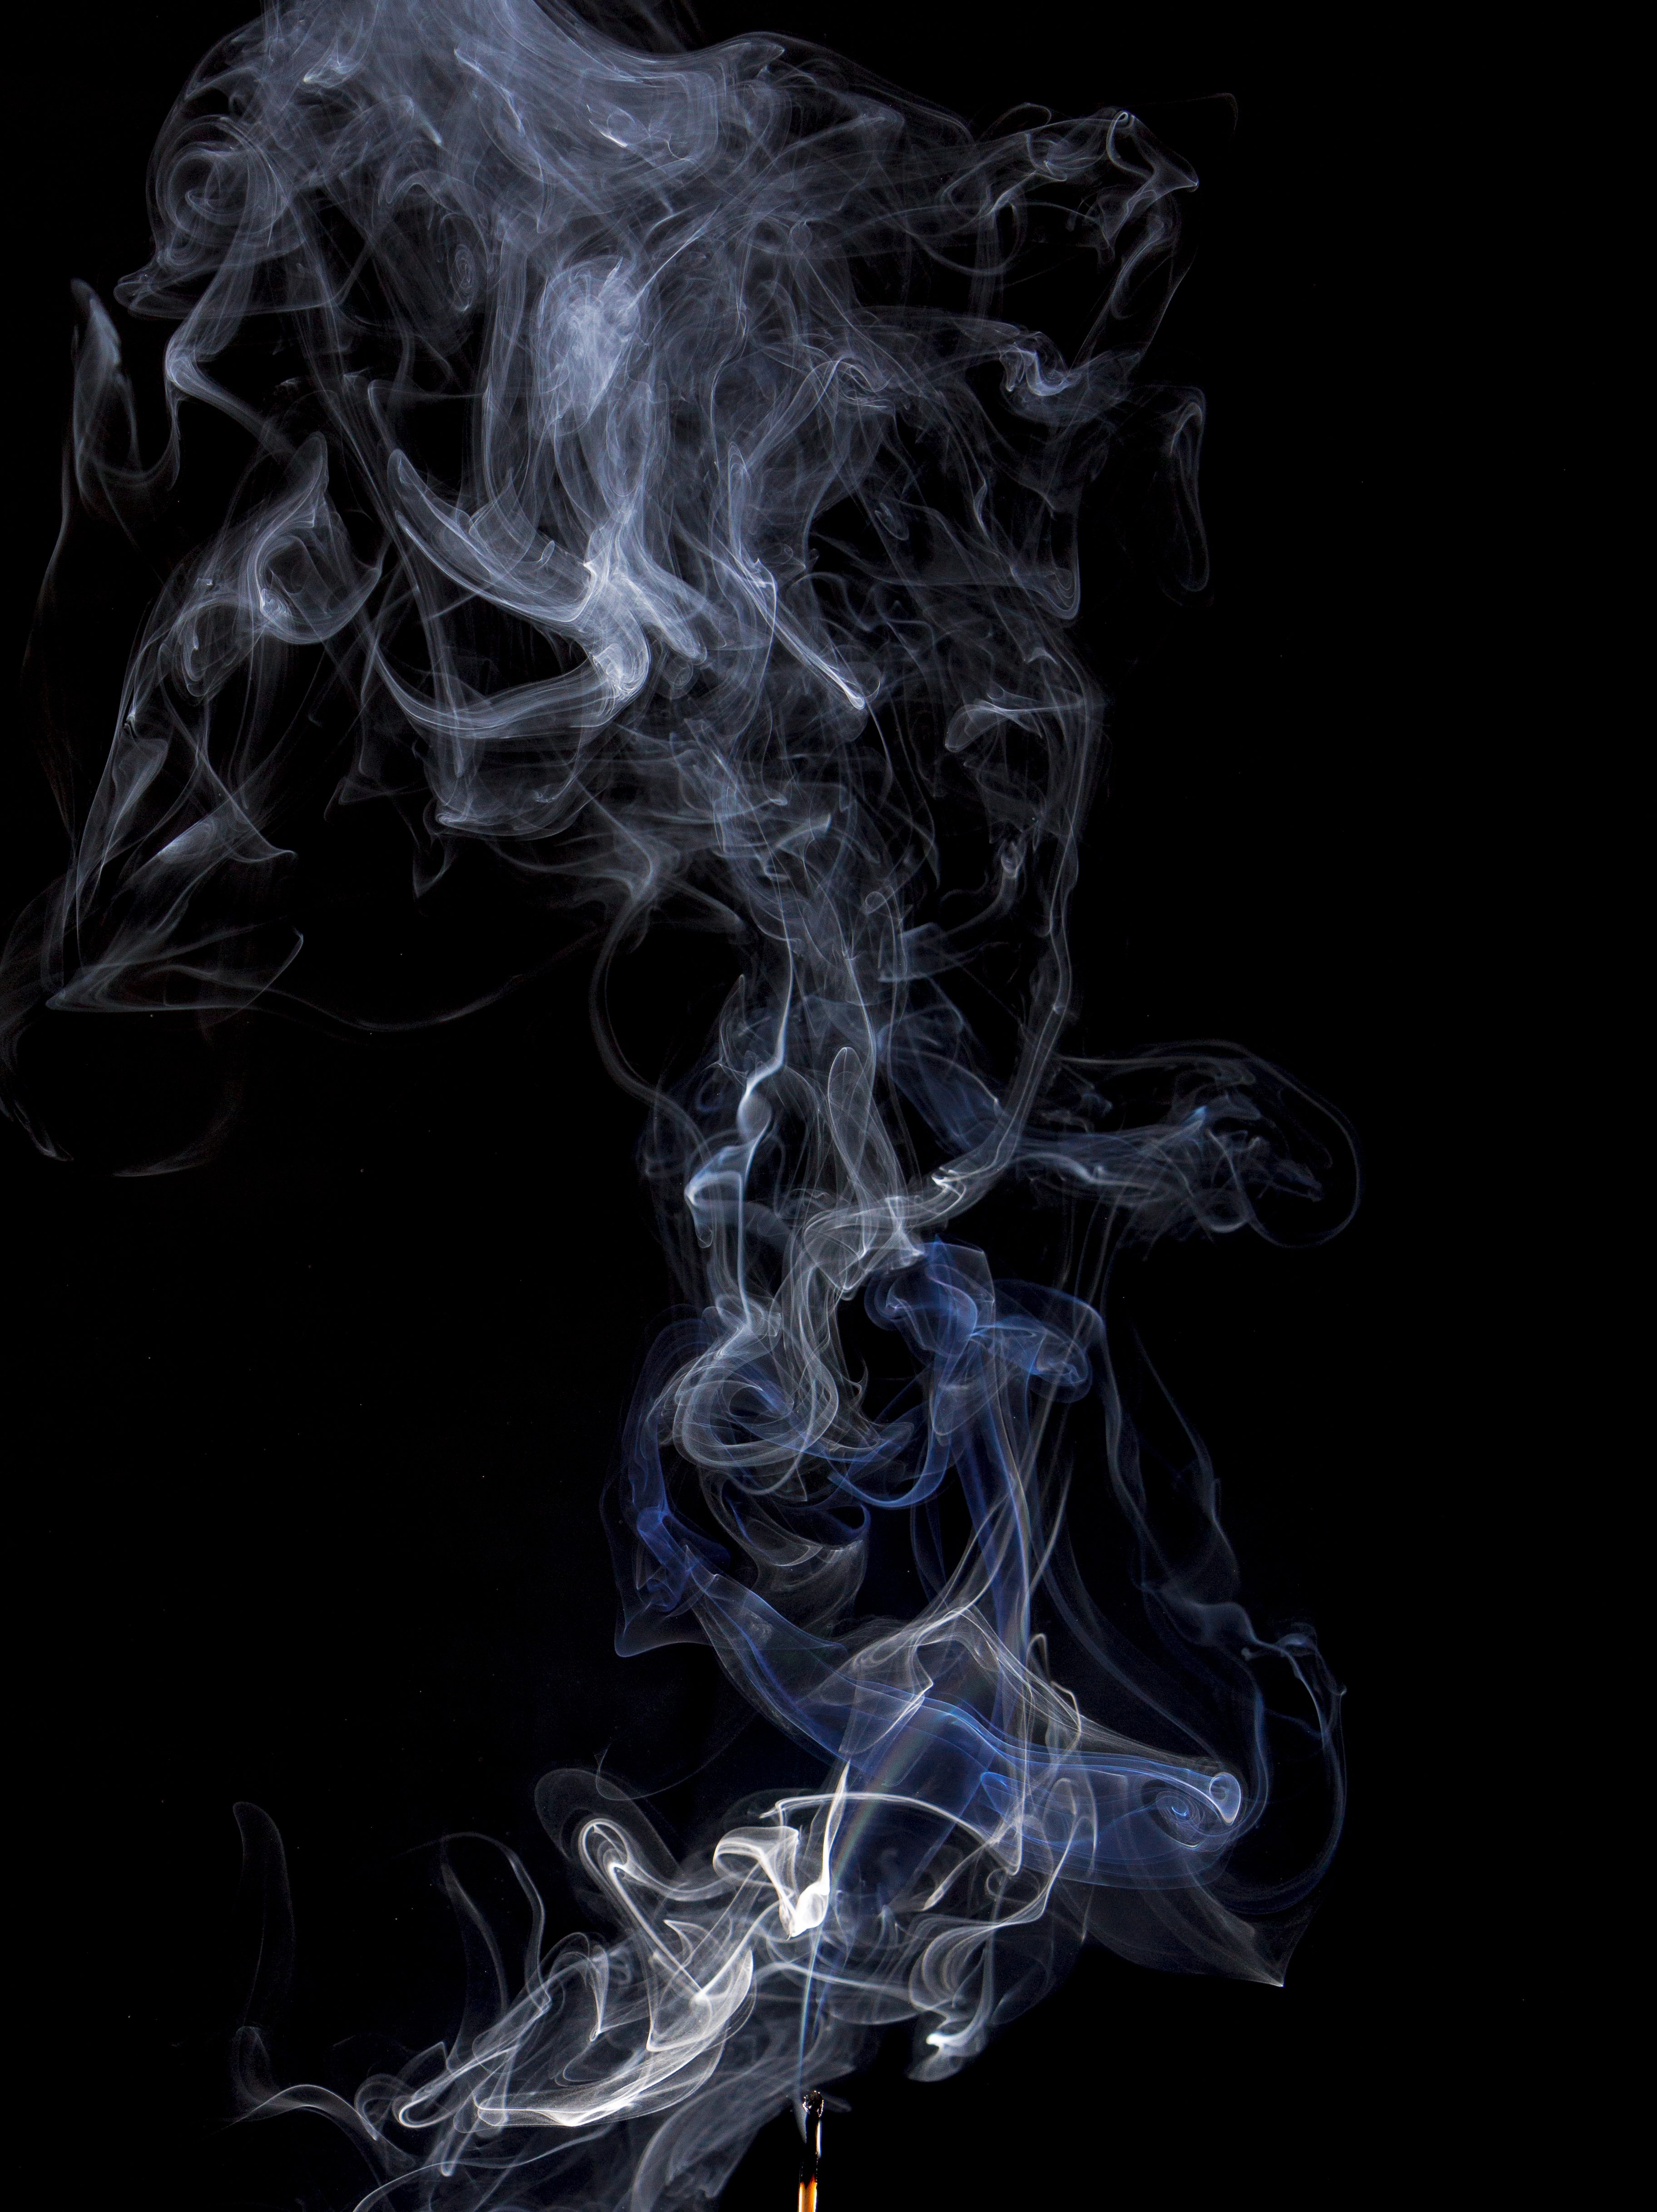 63757 free wallpaper 240x320 for phone, download images black, match, smoke, dark 240x320 for mobile